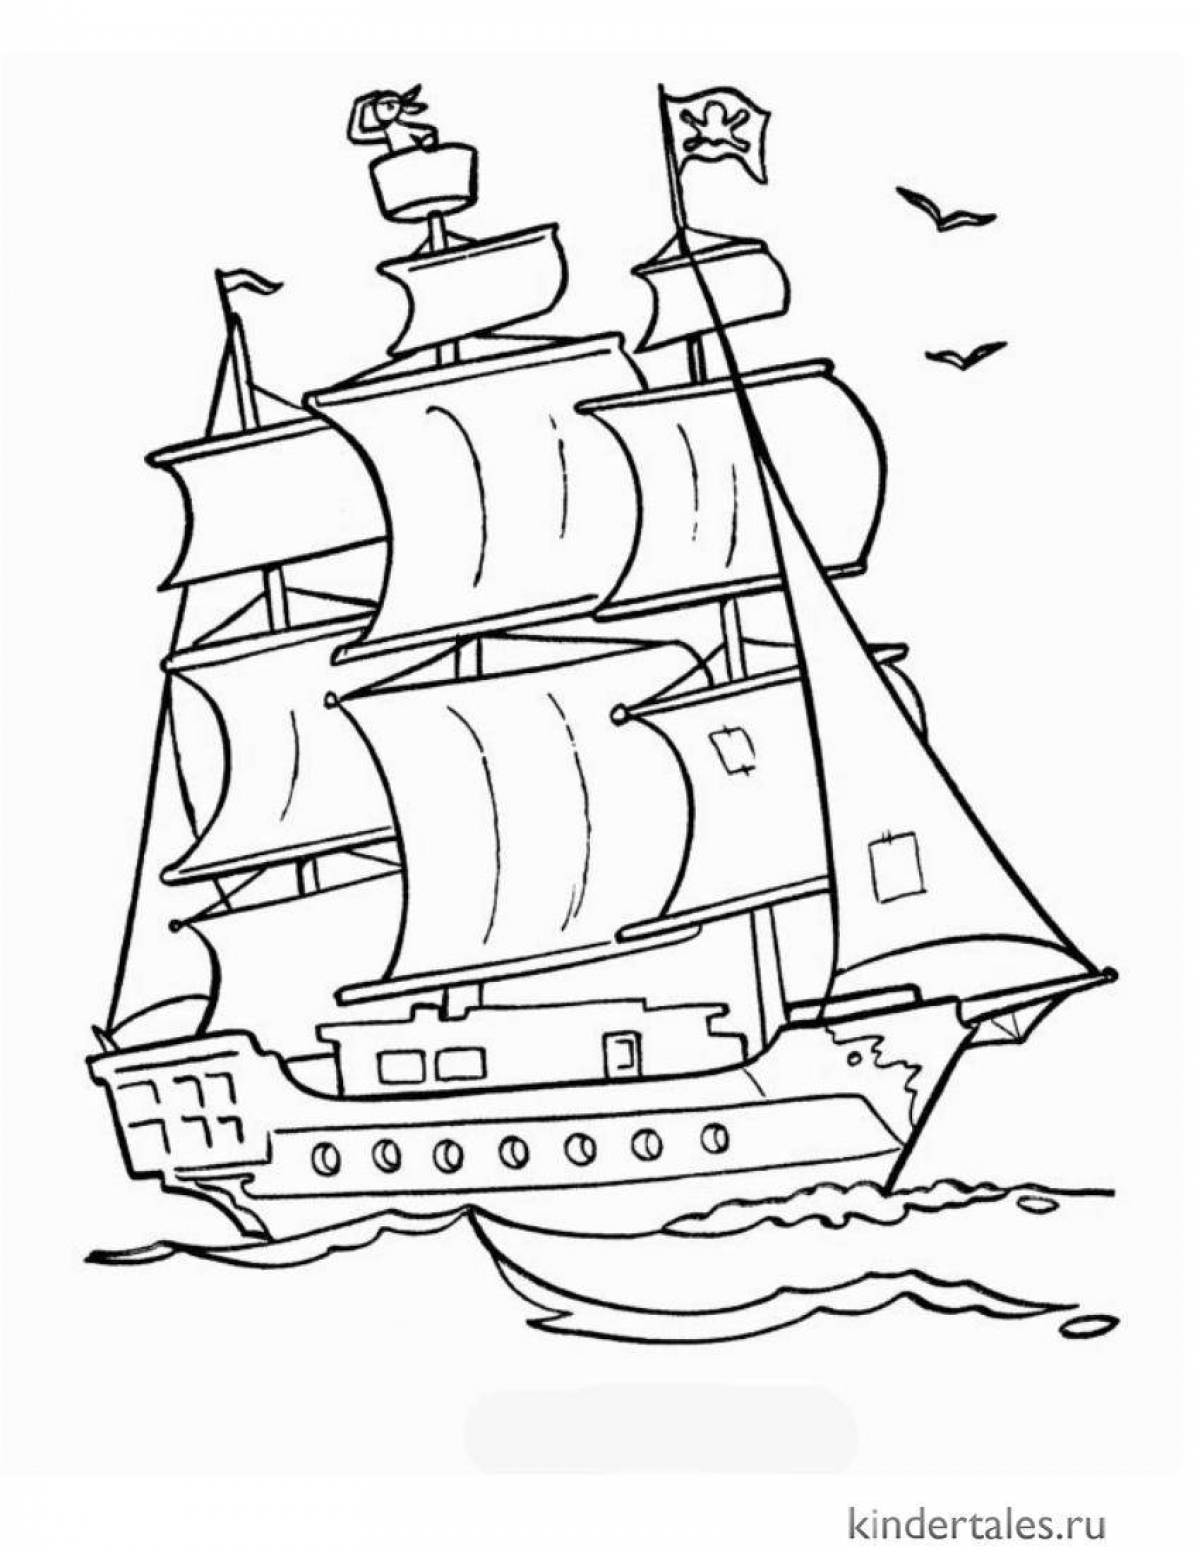 Playful ship coloring page for 7 year olds